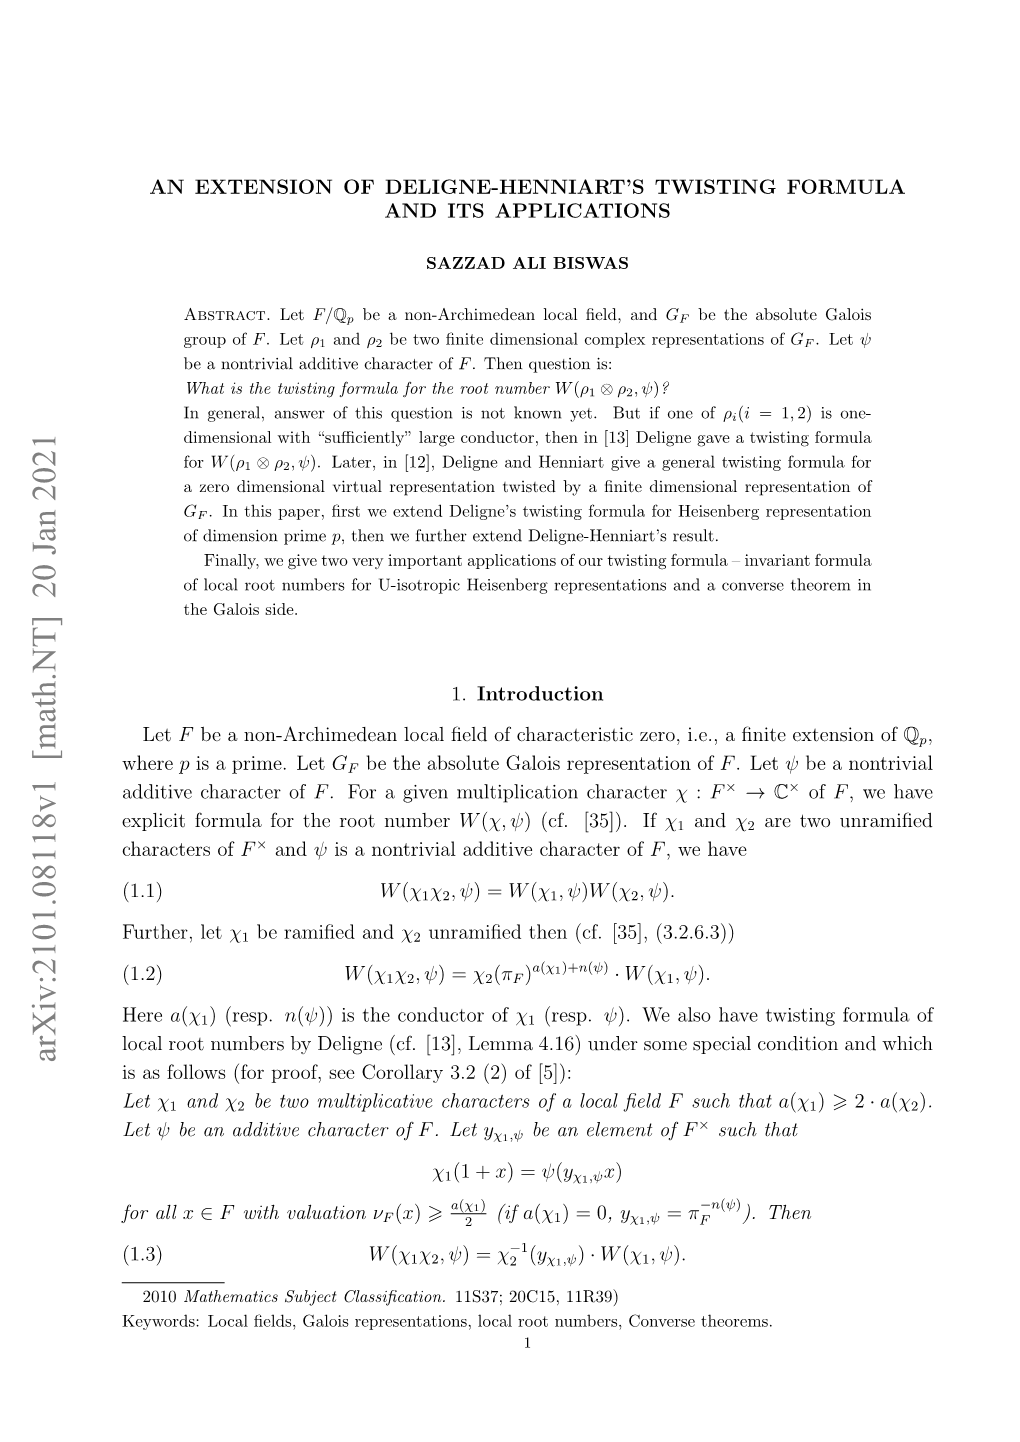 An Extension of Deligne-Henniart's Twisting Formula and Its Applications